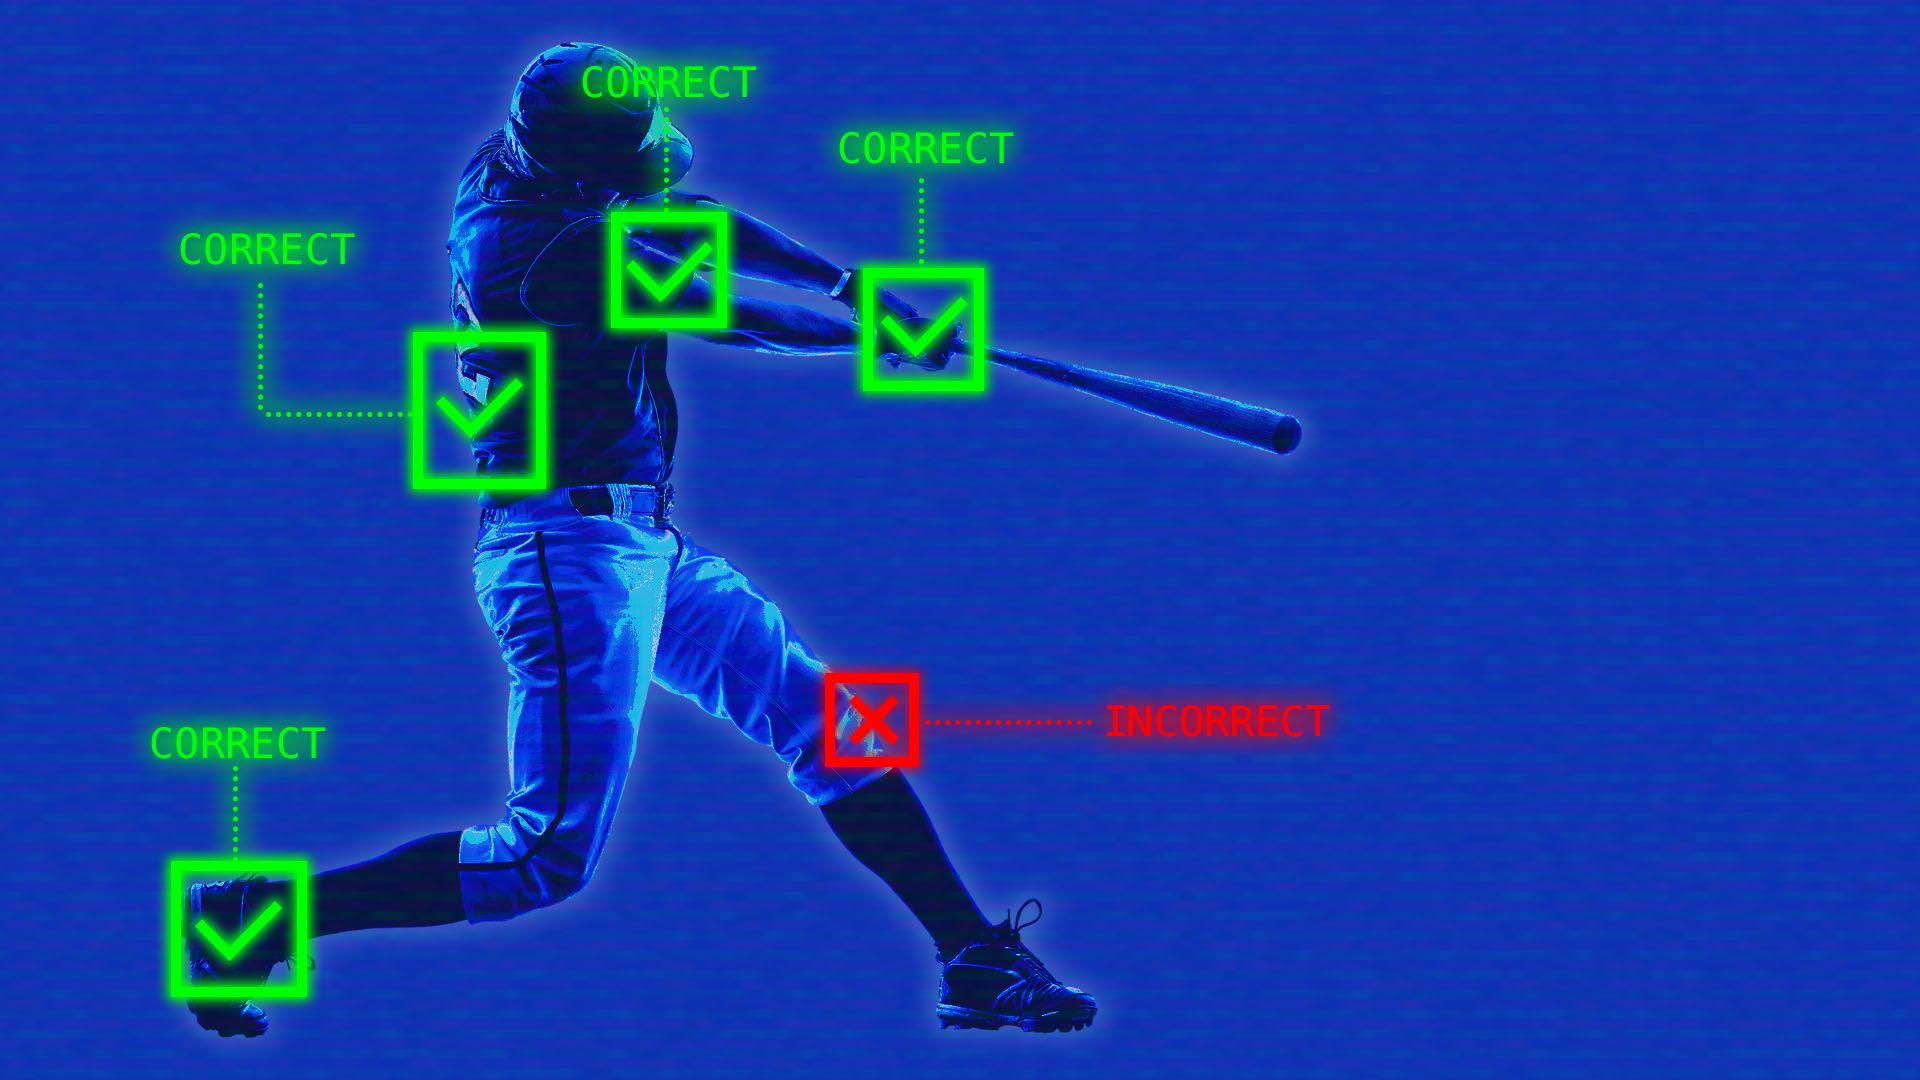 Illustration of a baseball player's batting form being evaluated by technology